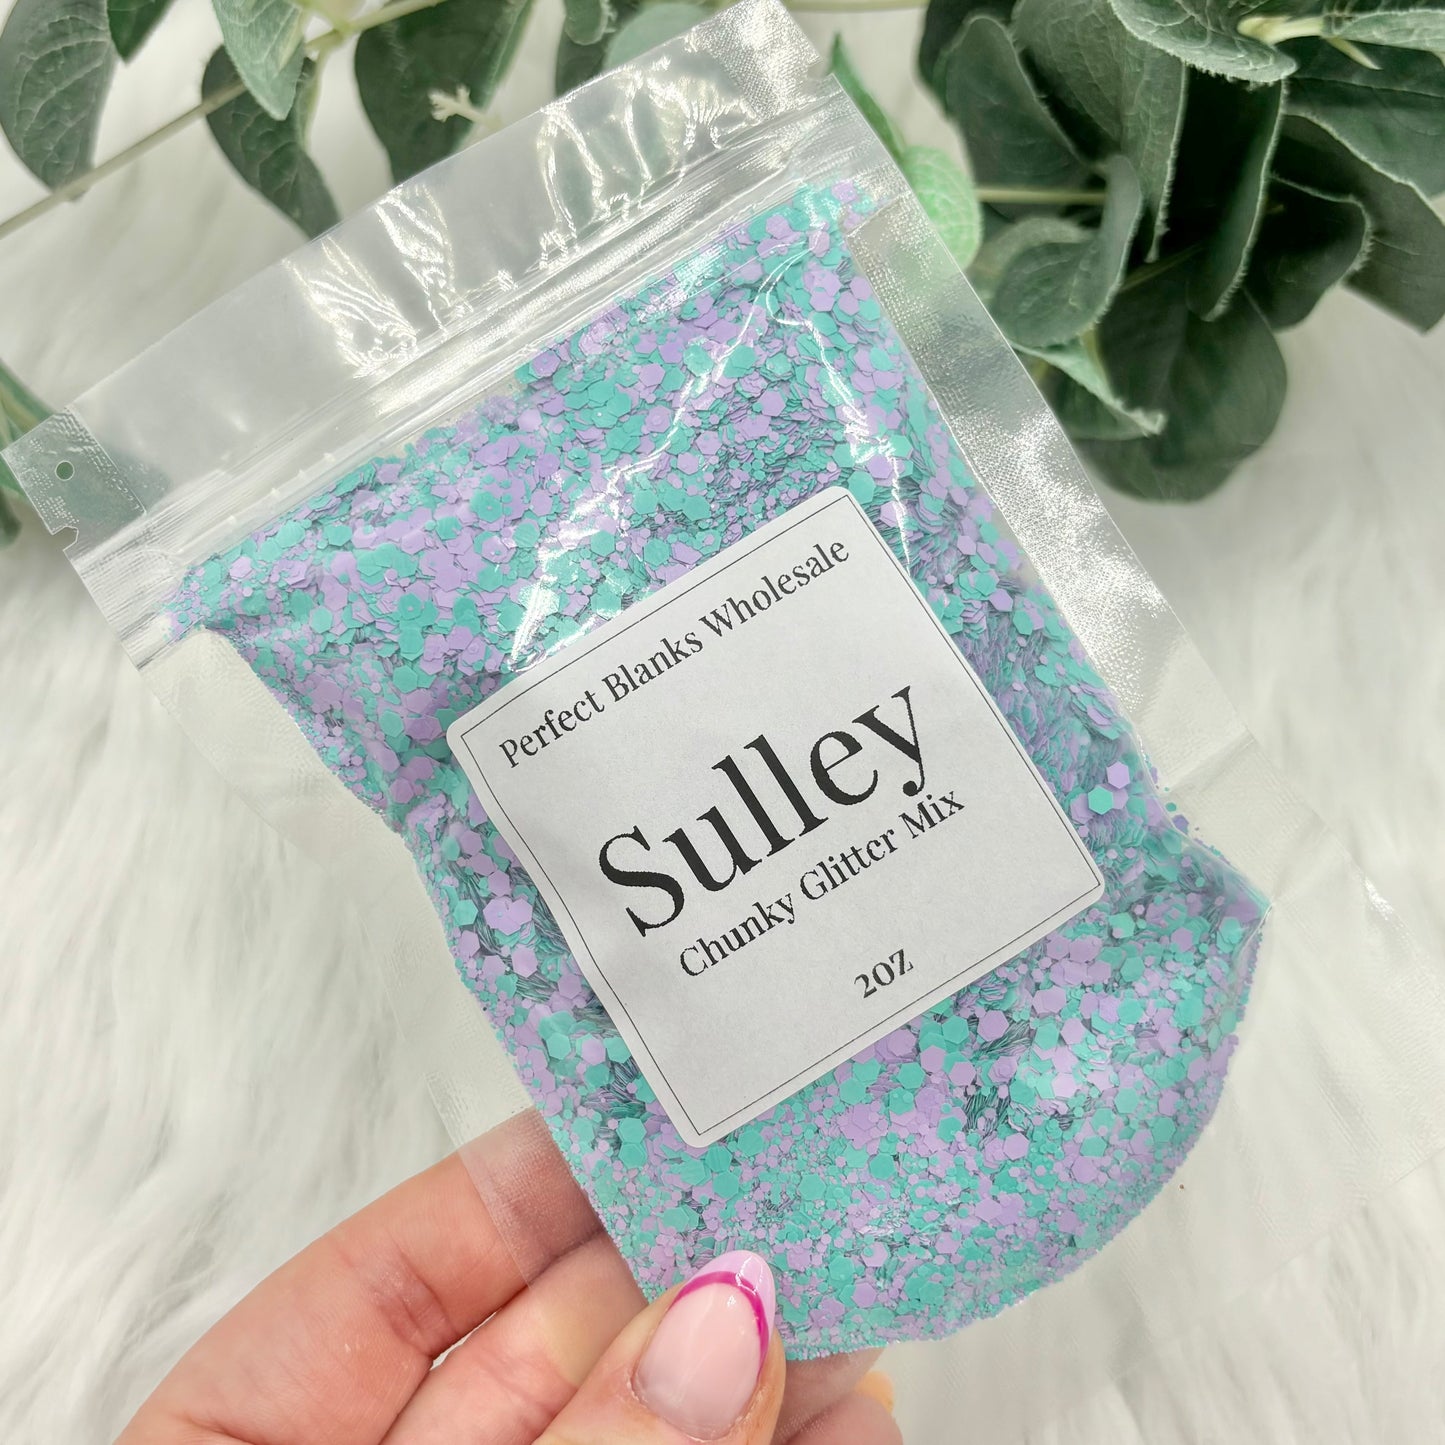 Sulley - Chunky Glitter